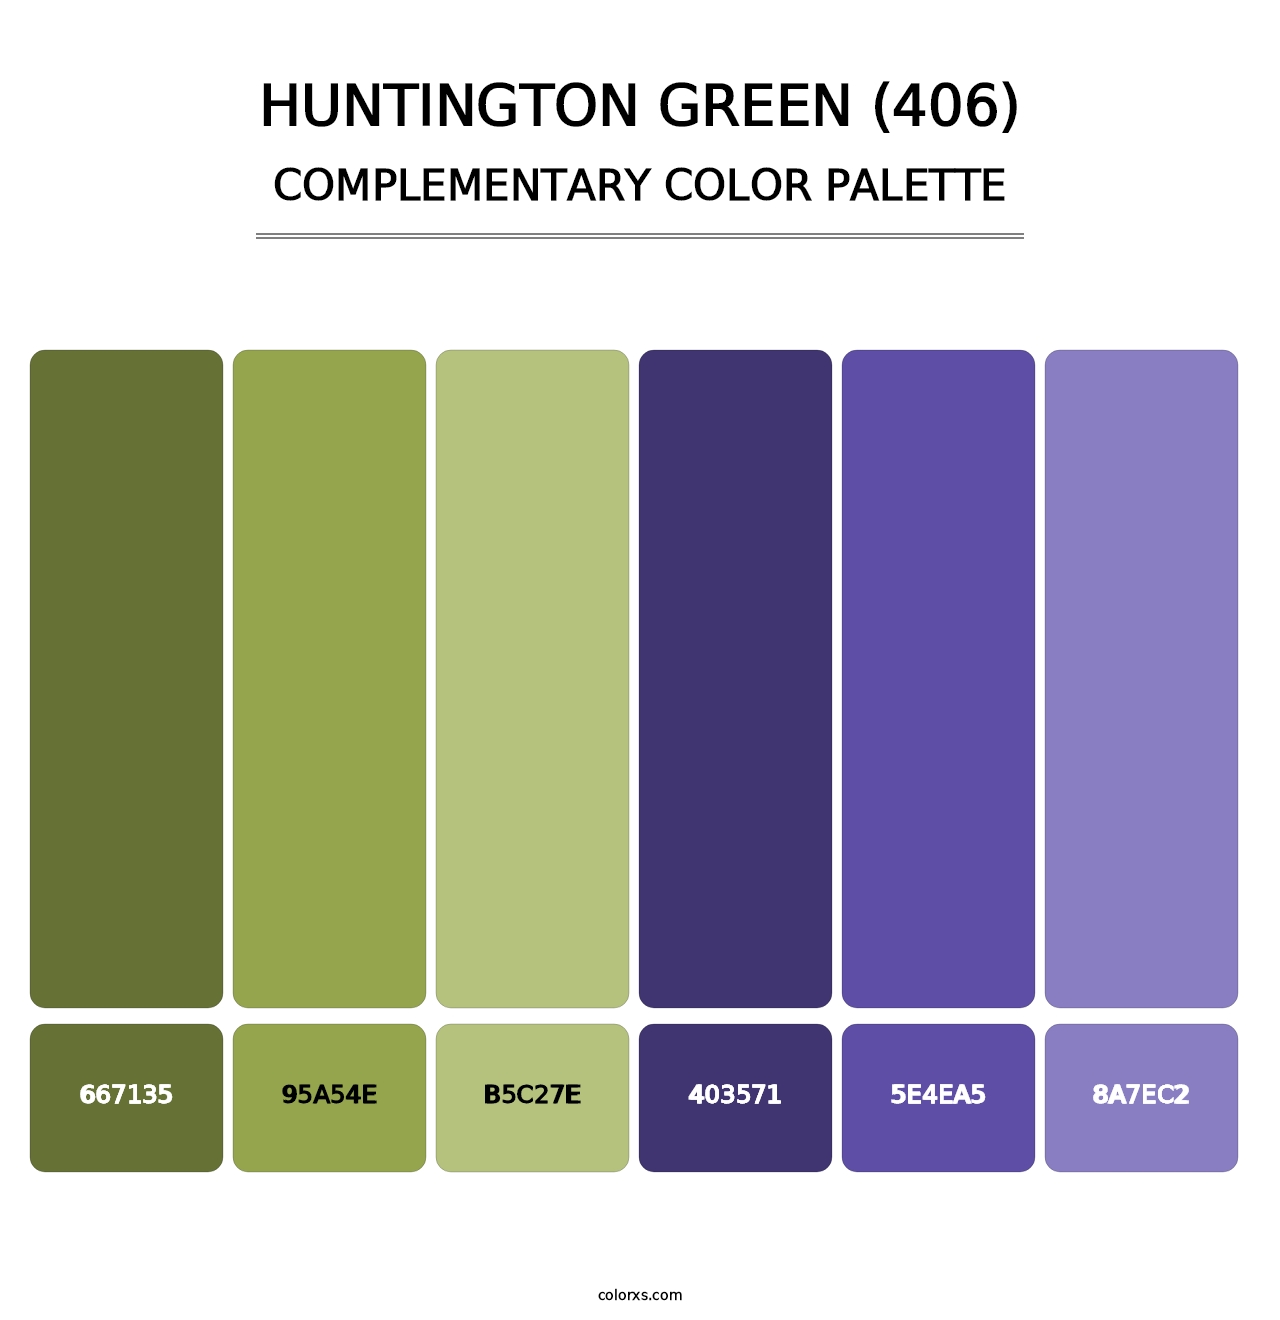 Huntington Green (406) - Complementary Color Palette